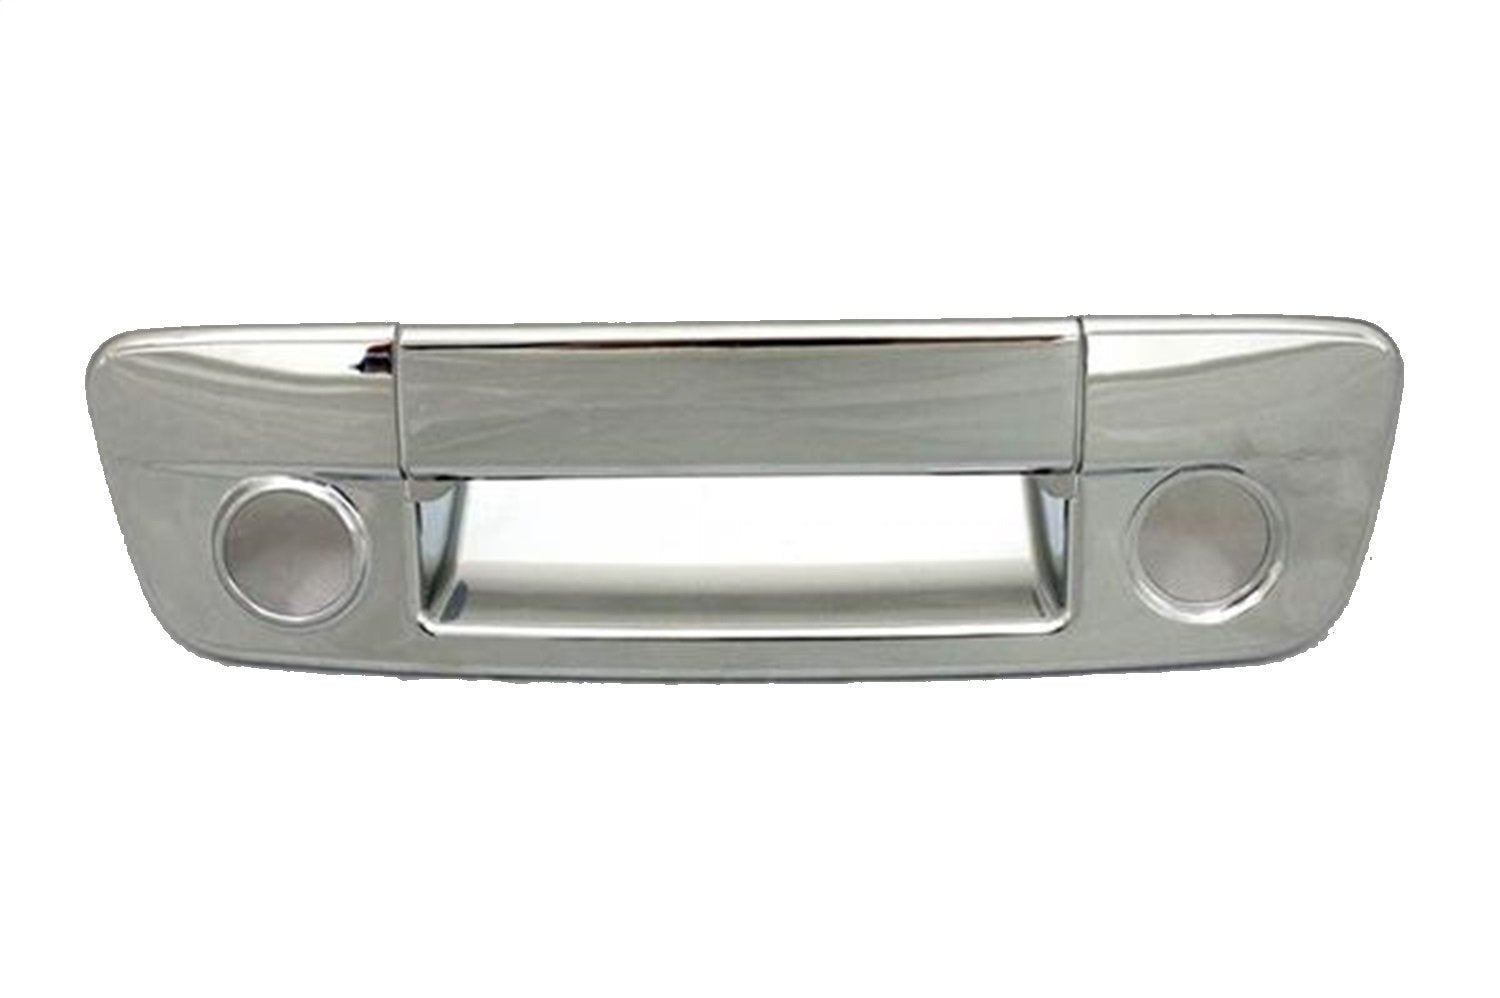 Putco 400503 Tailgate And Rear Handle Cover